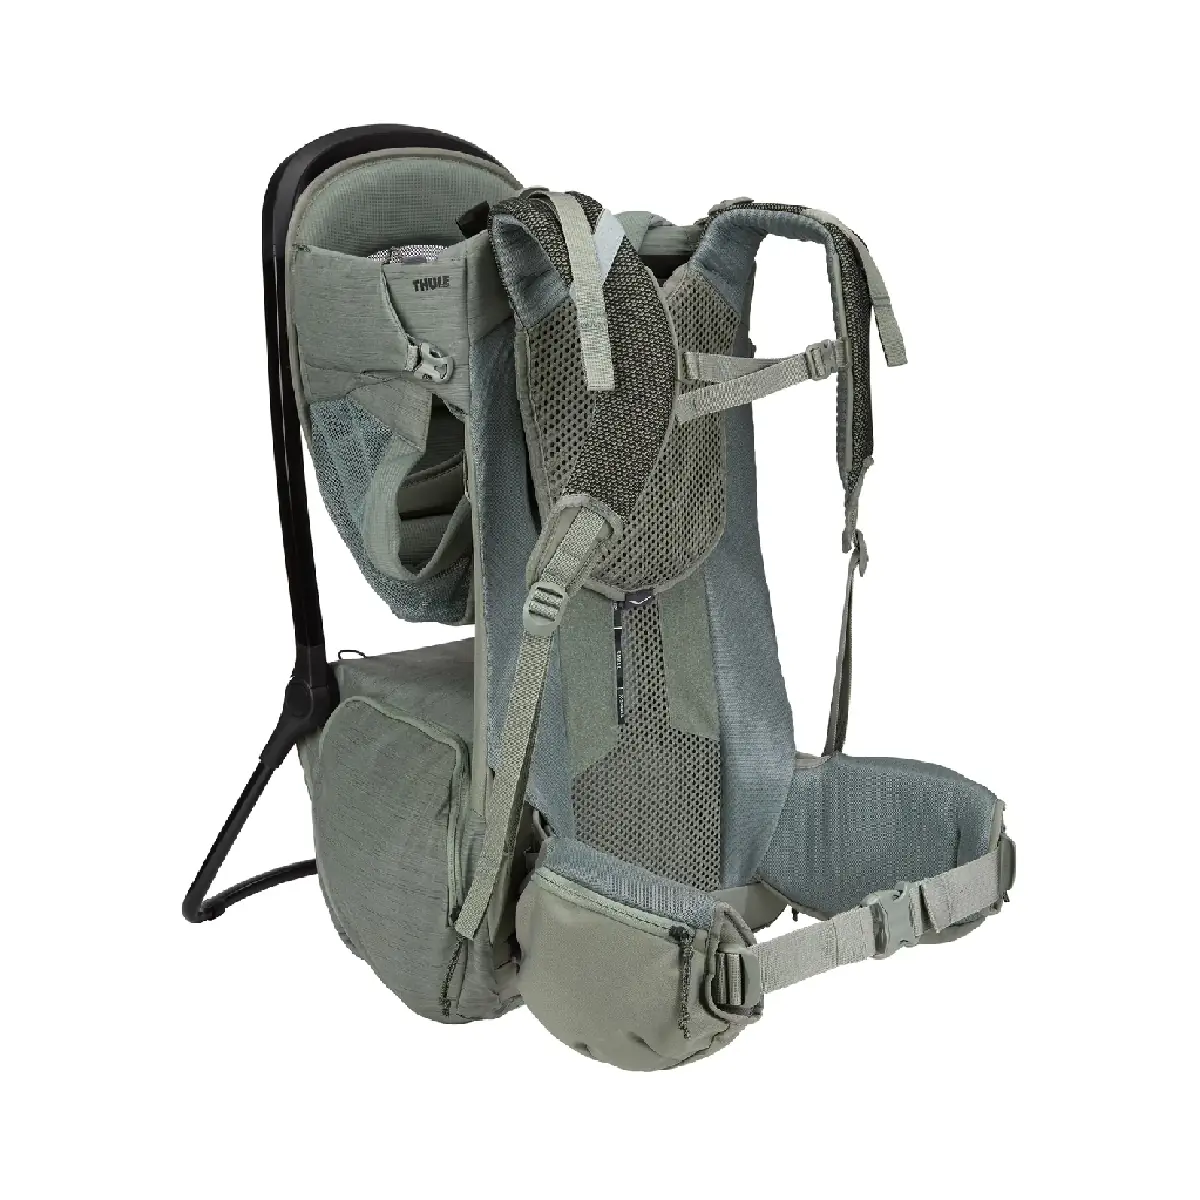 Thule Sapling Child Carrier-Agave